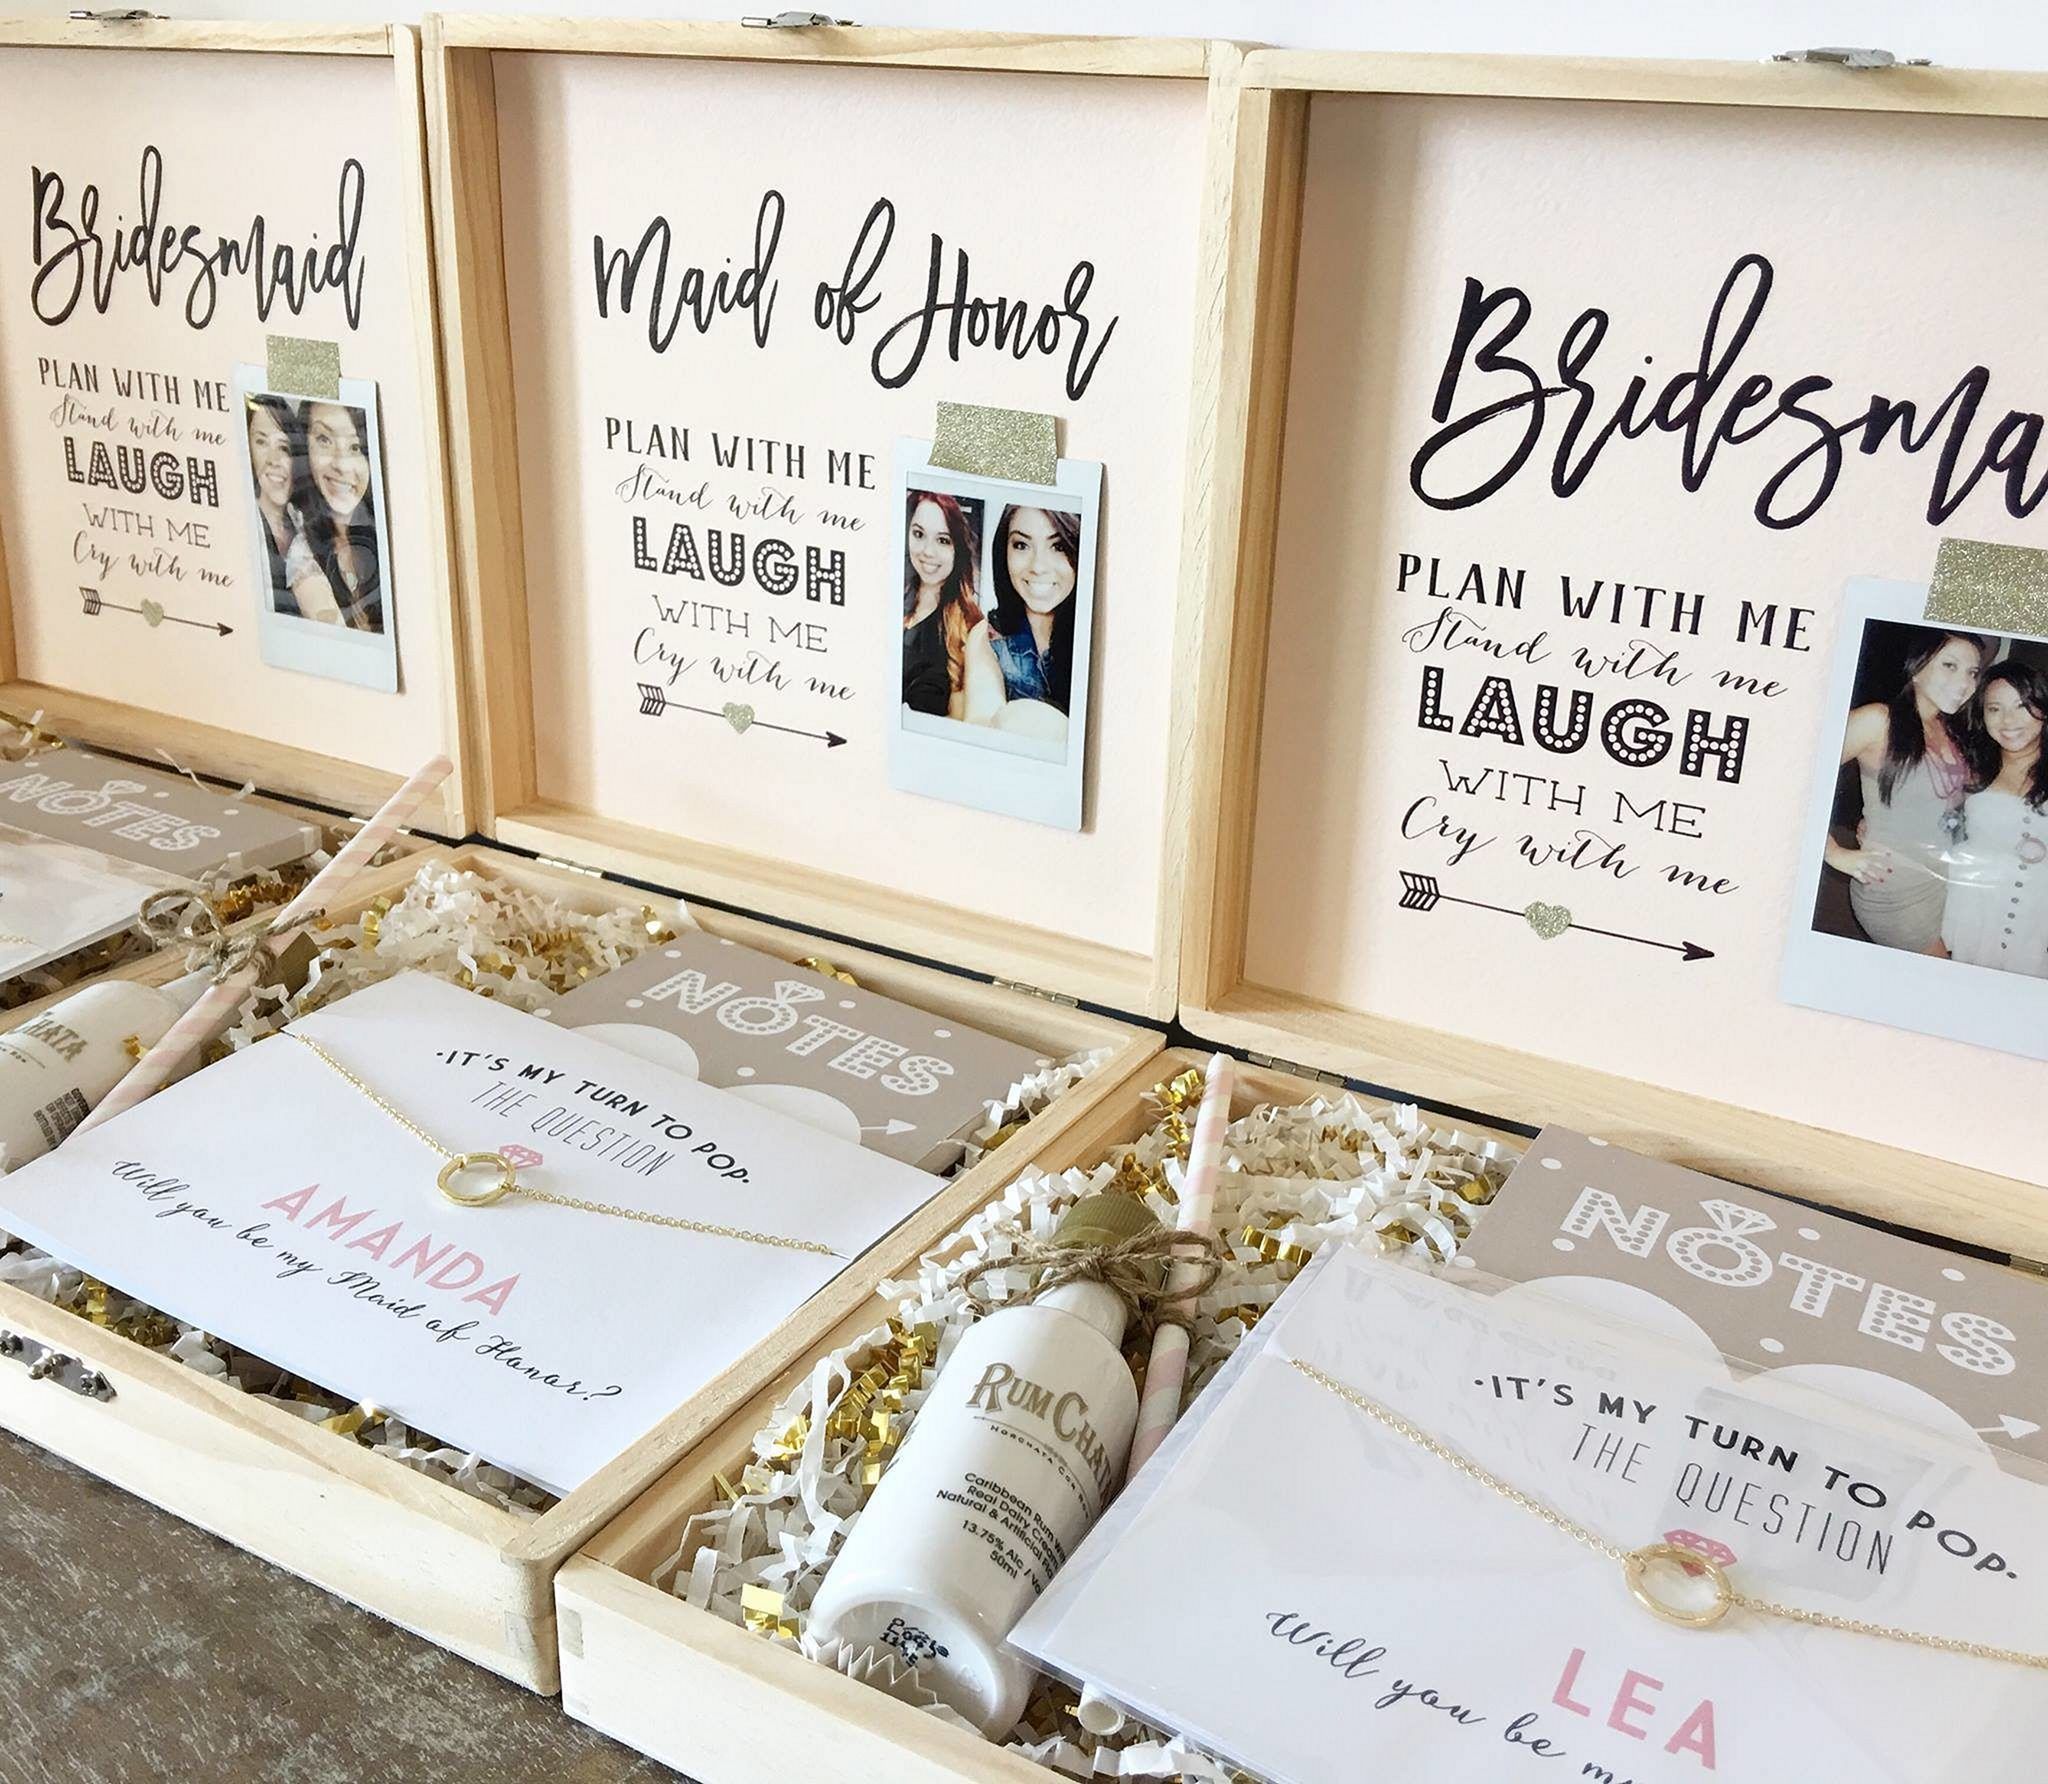 15 Best Bridesmaid Proposal Ideas for Inspiration